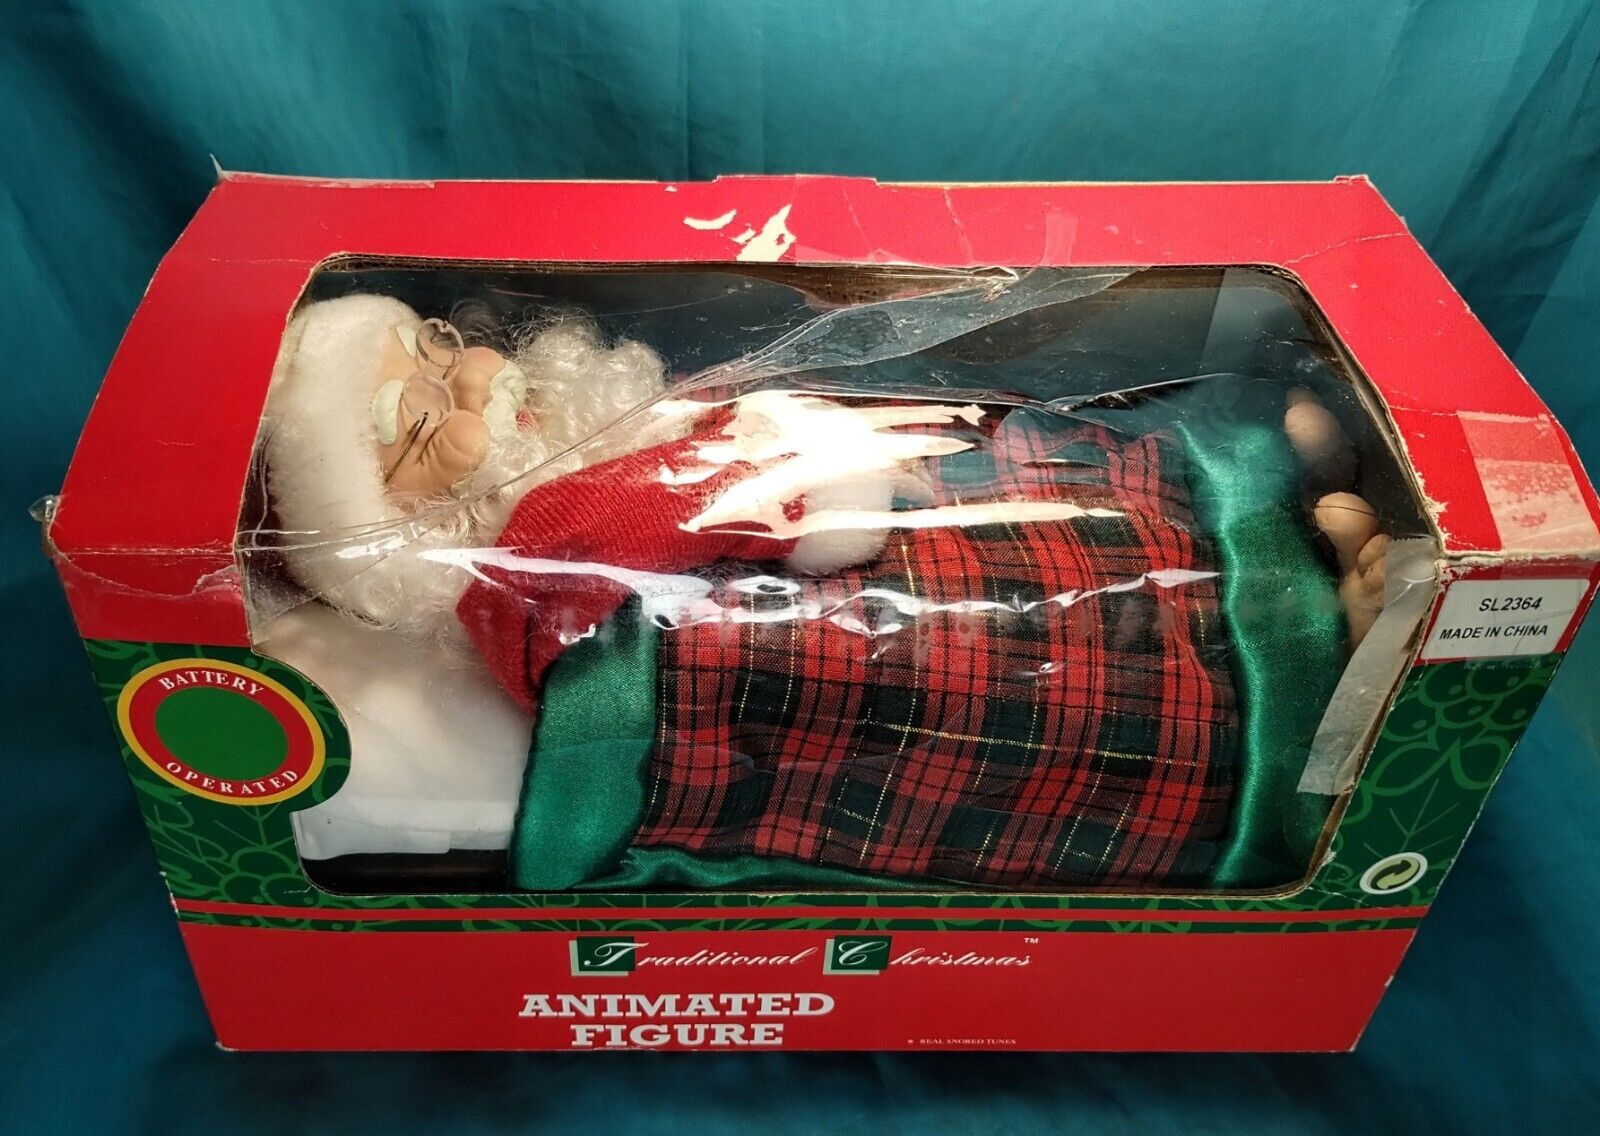 Vintage 1995 Animated Sleeping Santa in Bed Toes Out Christmas Holiday Decor